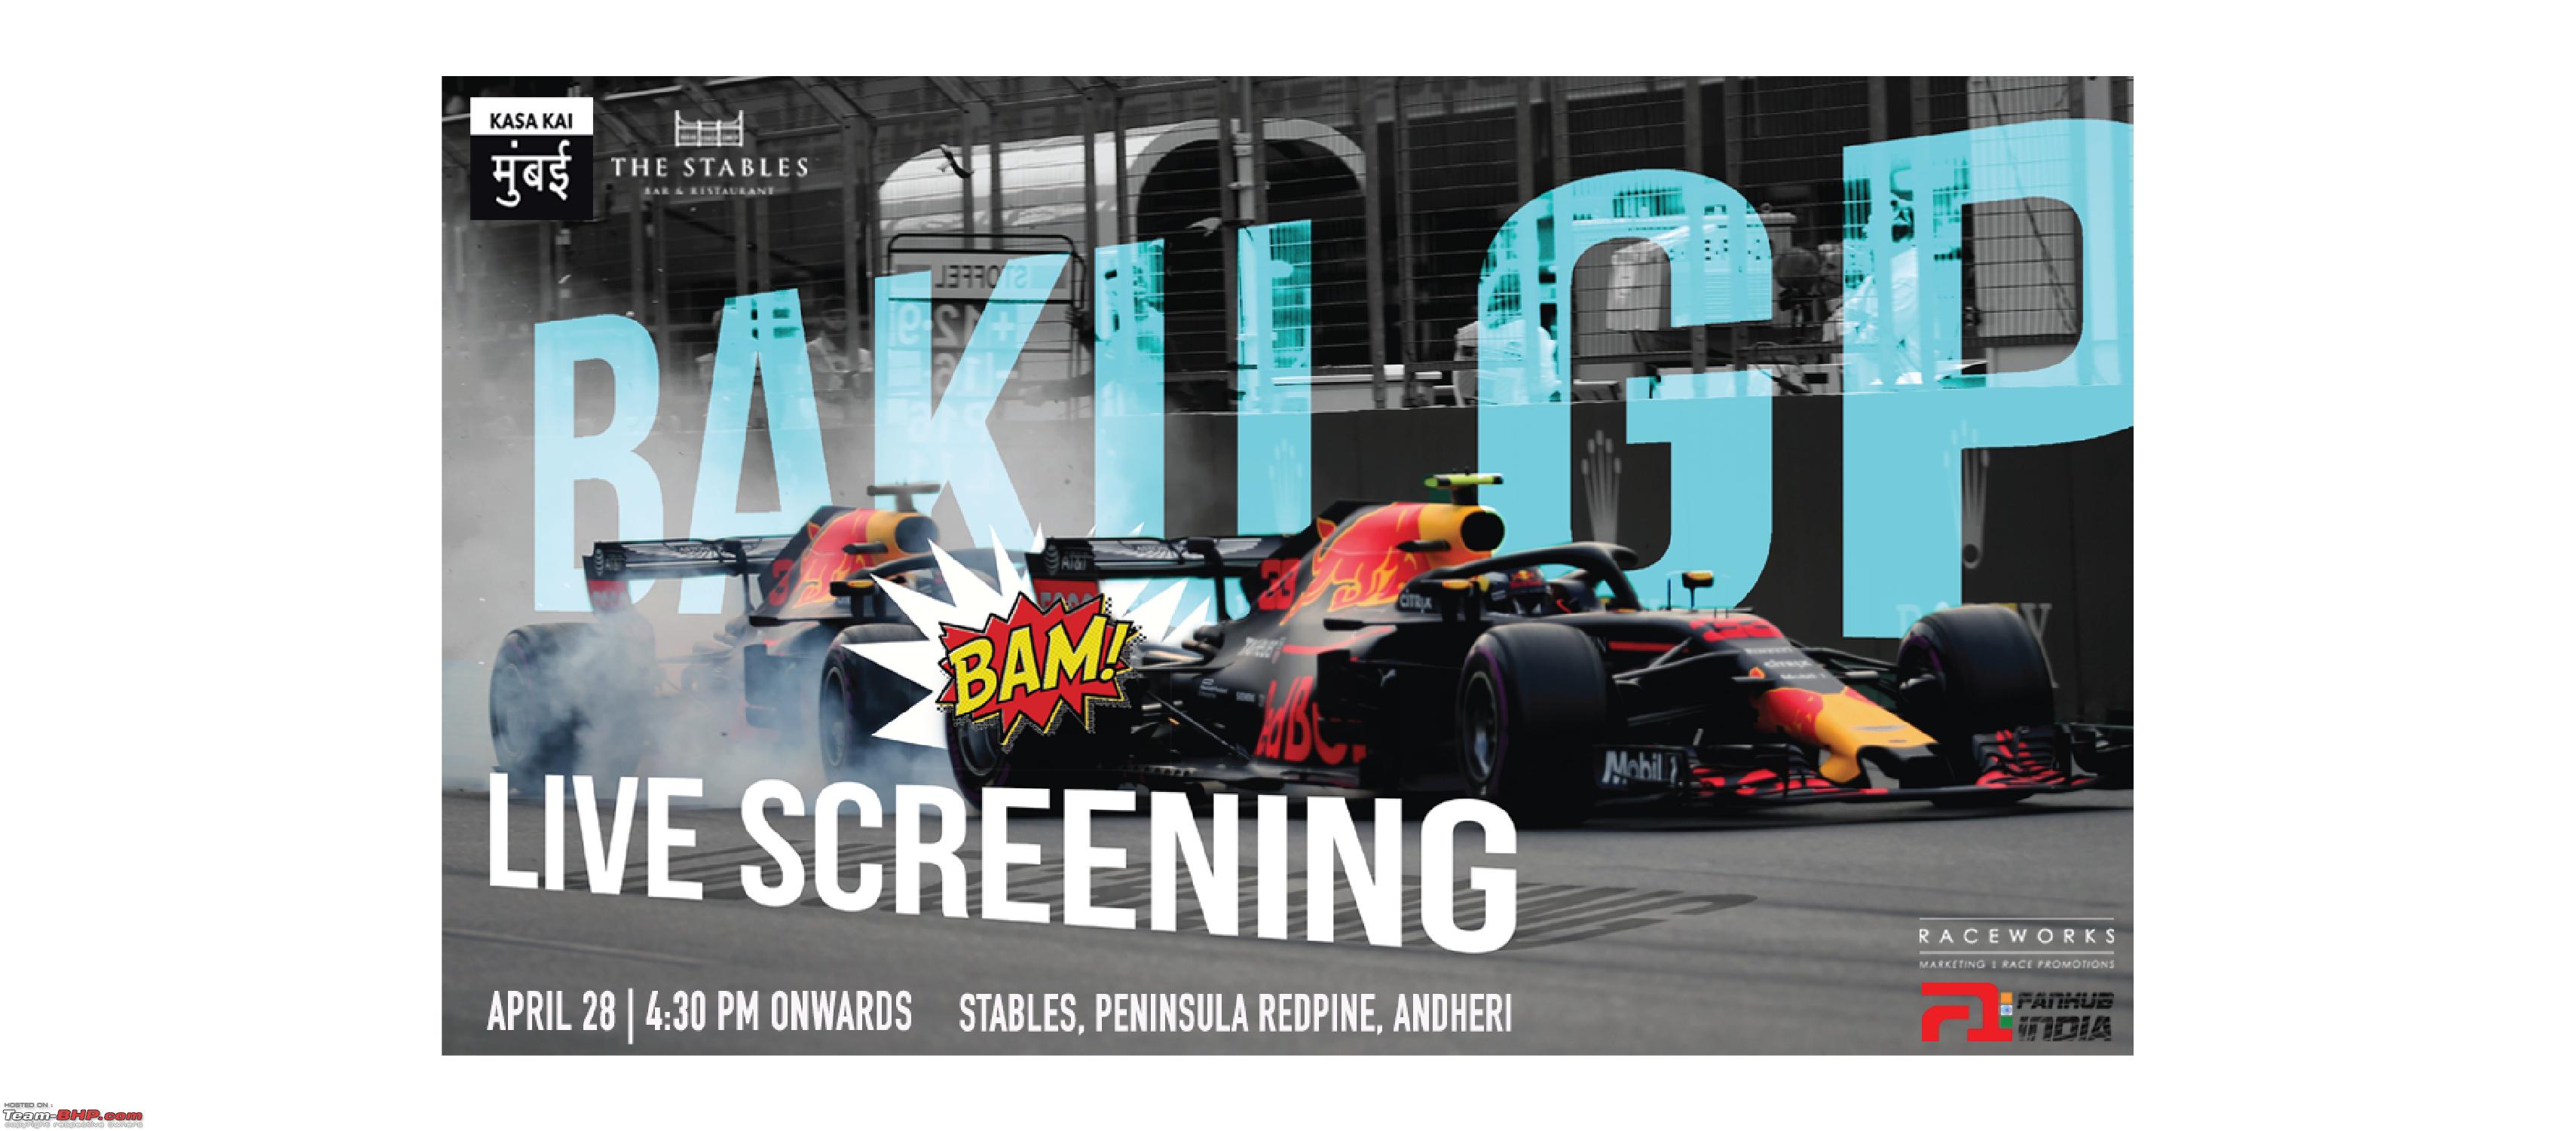 F1 live screening - Where in your city? - Page 2